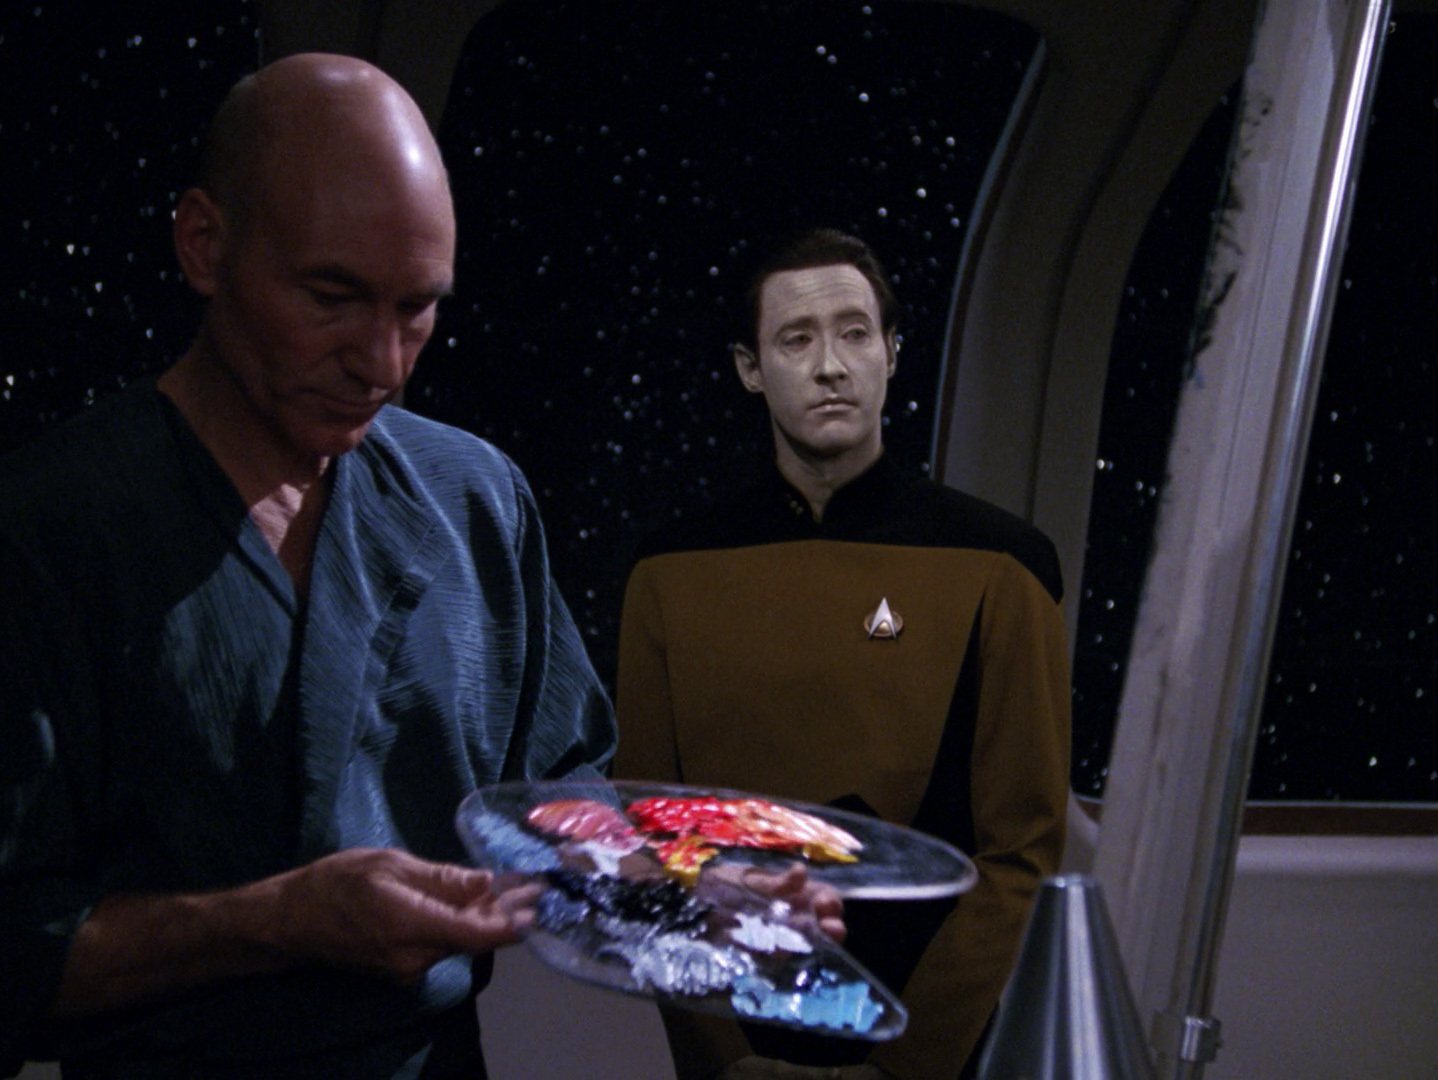 Captain Picard holds a paint palette while Data looks at Picard's painting.